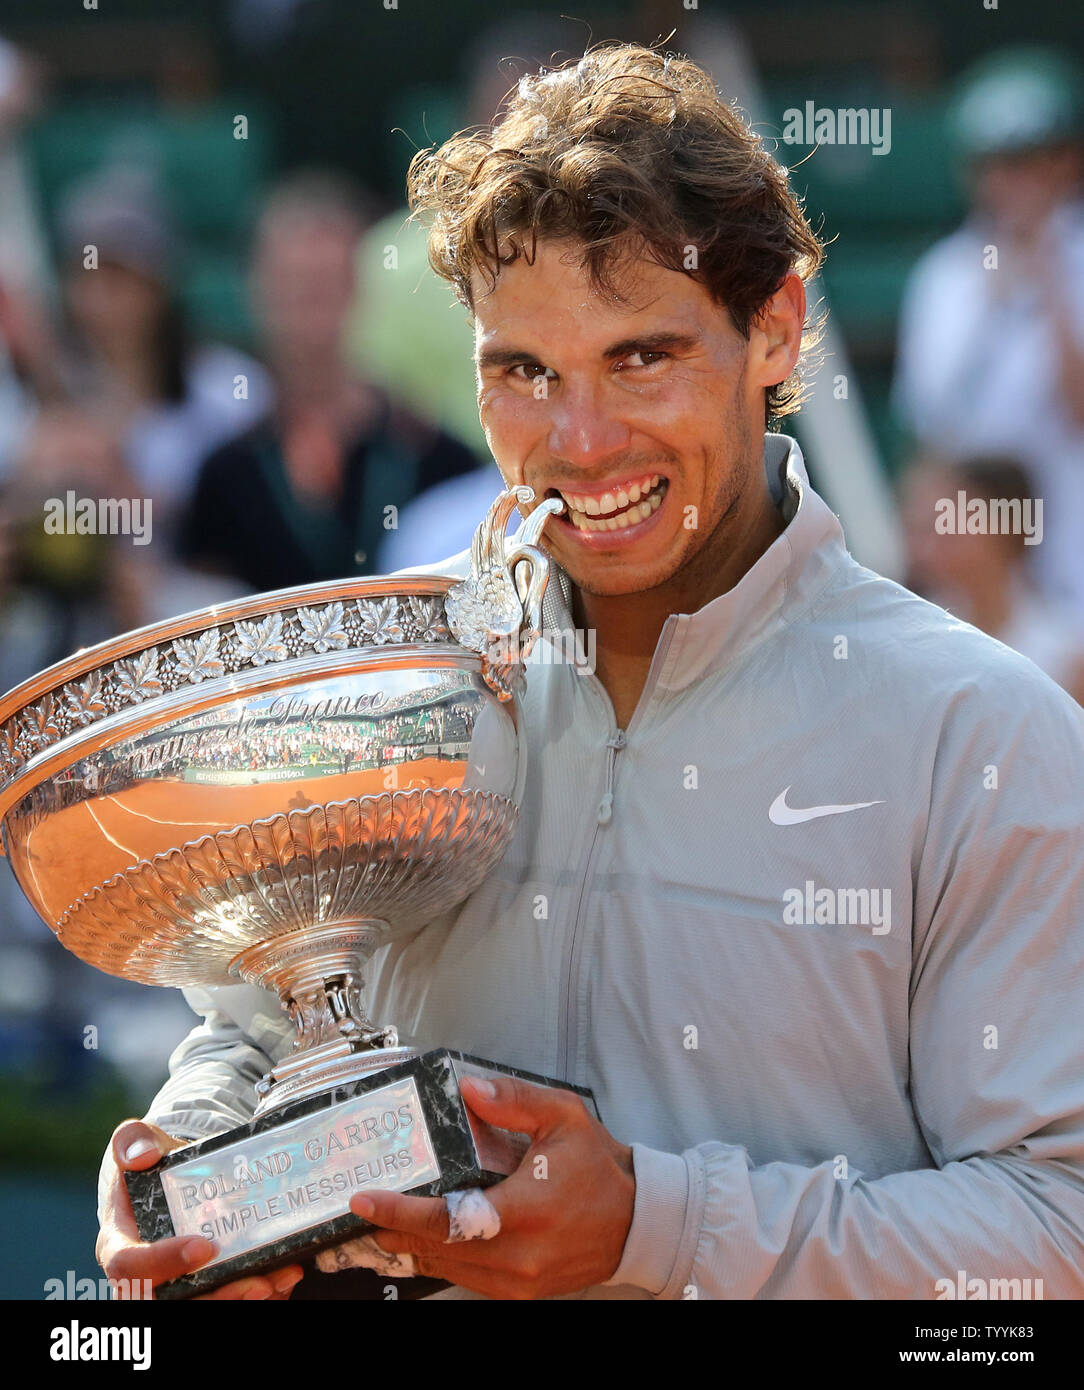 Rafael Nadal of Spain holds the championship trophy after winning his French  Open men's final match against Novak Djokovic of Serbia at Roland Garros in  Paris on June 8, 2014. Nadal defeated